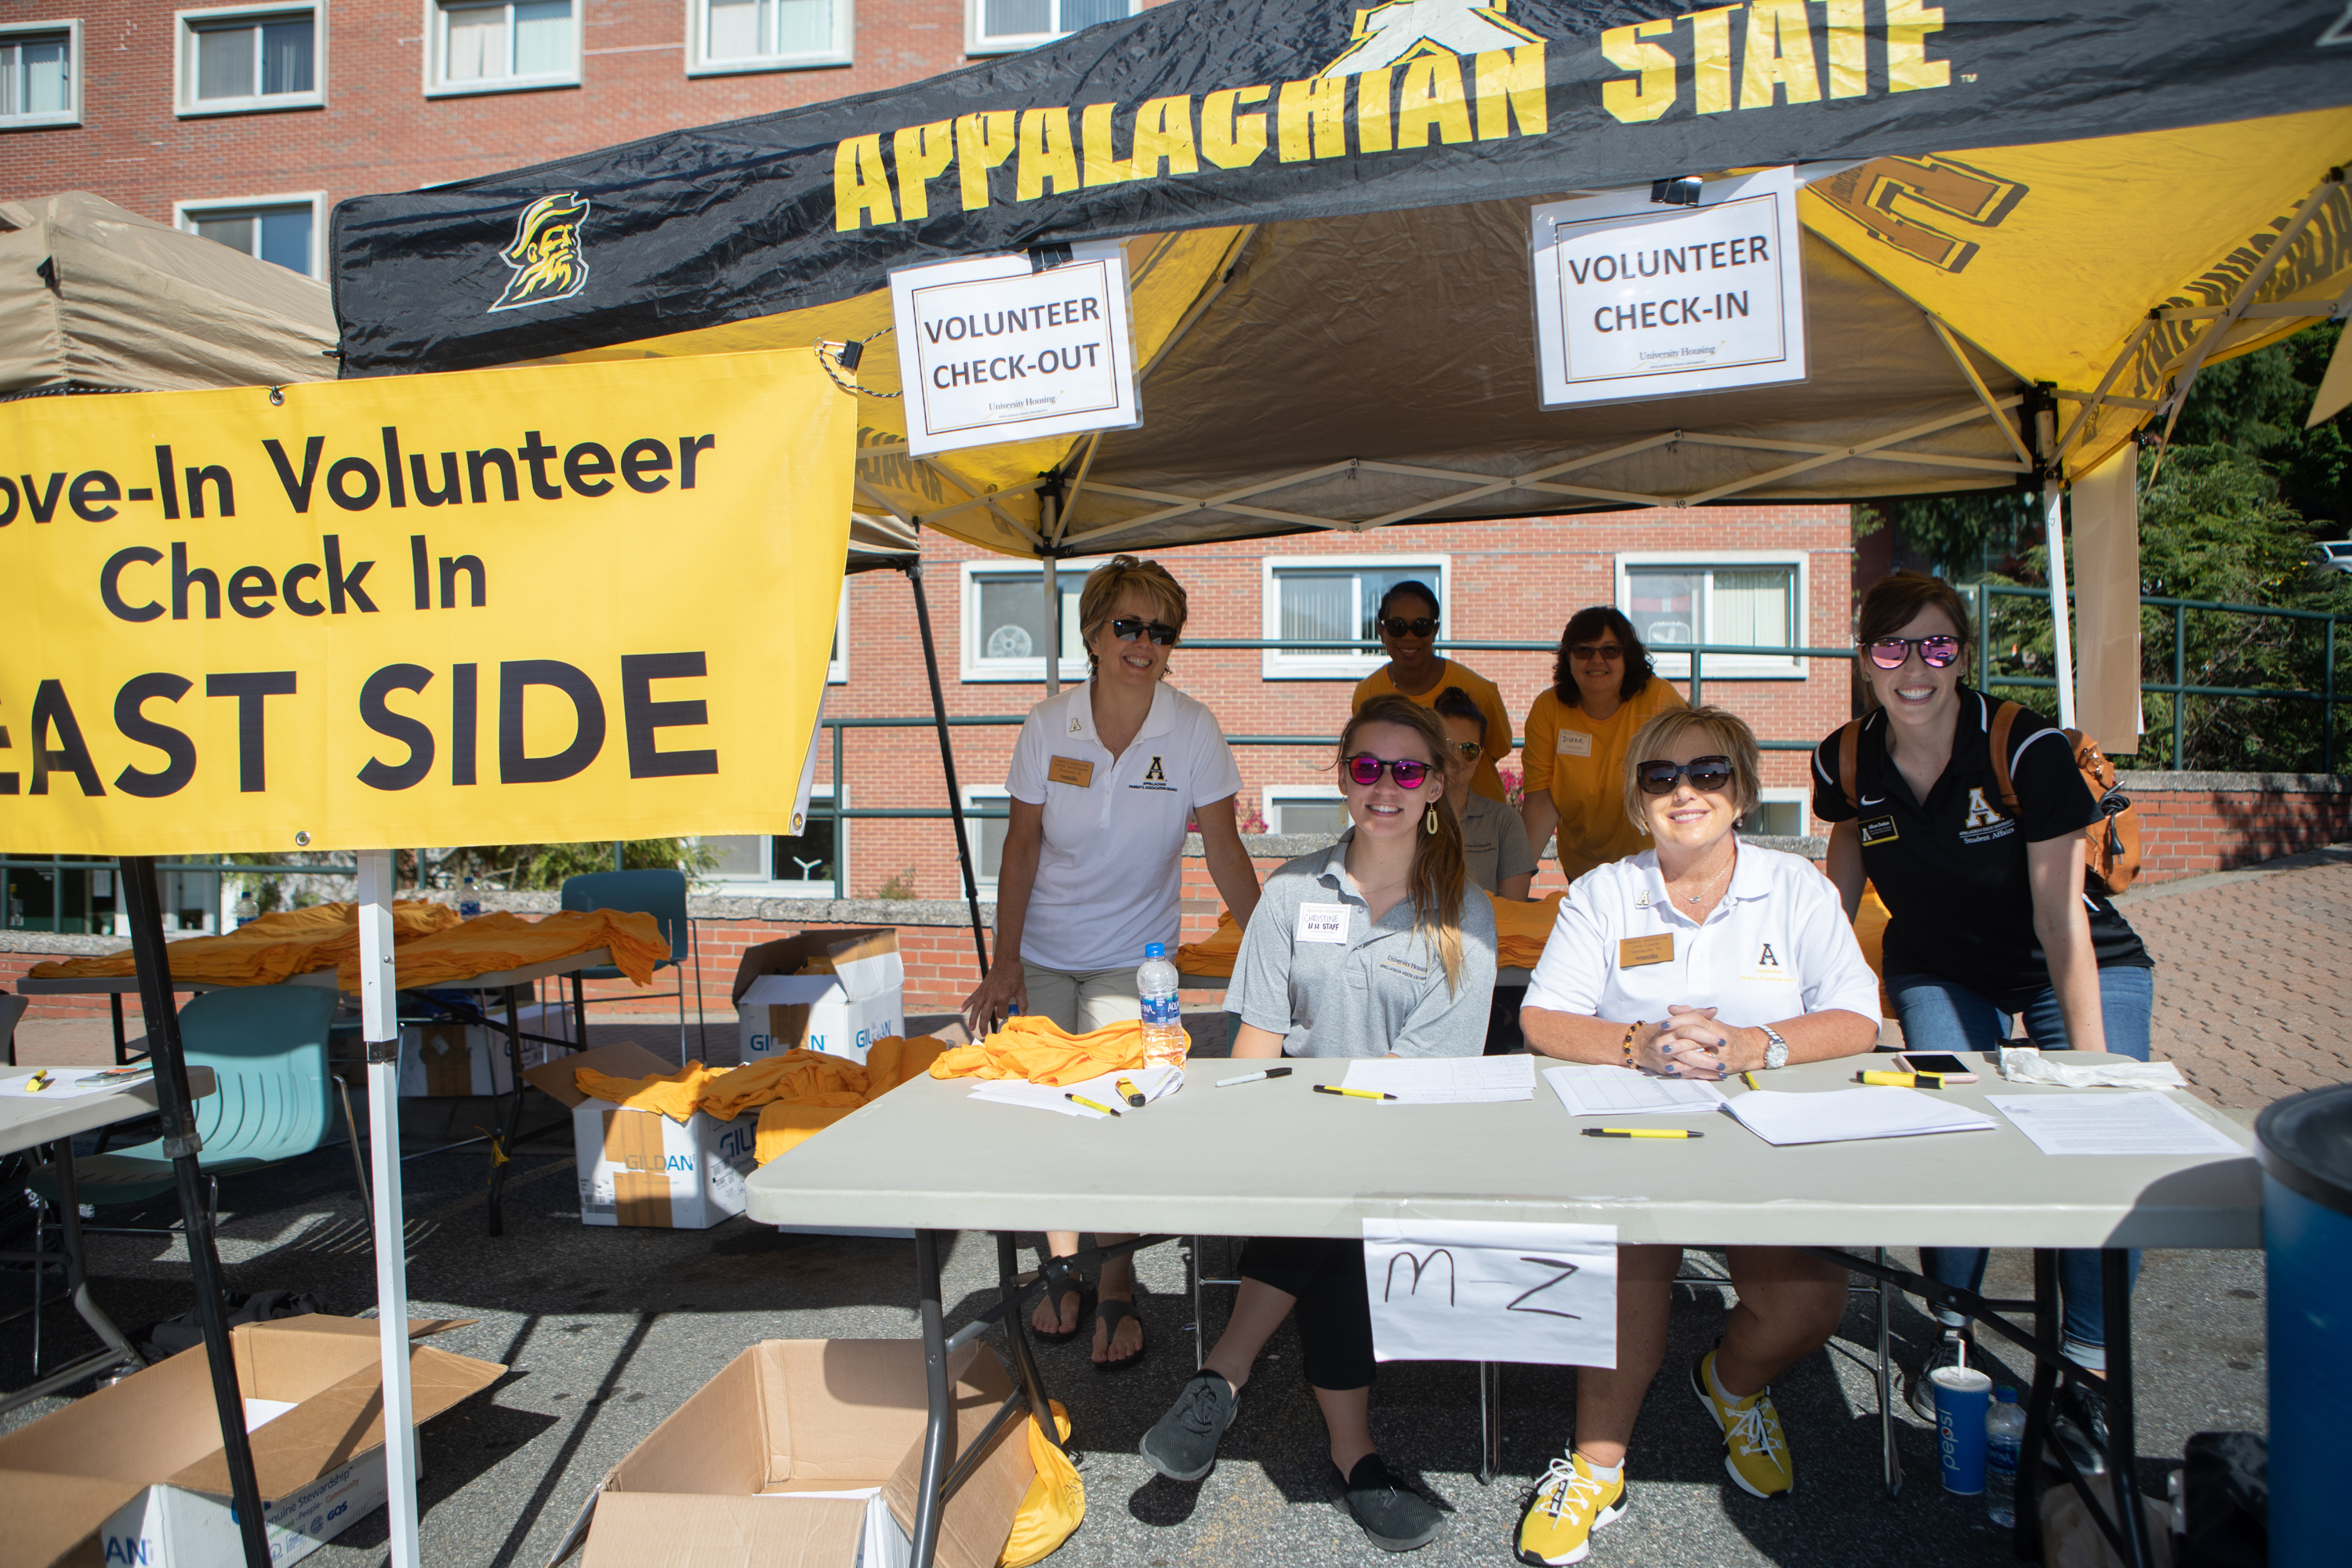 More than 800 volunteers assist with movein at App State Appalachian